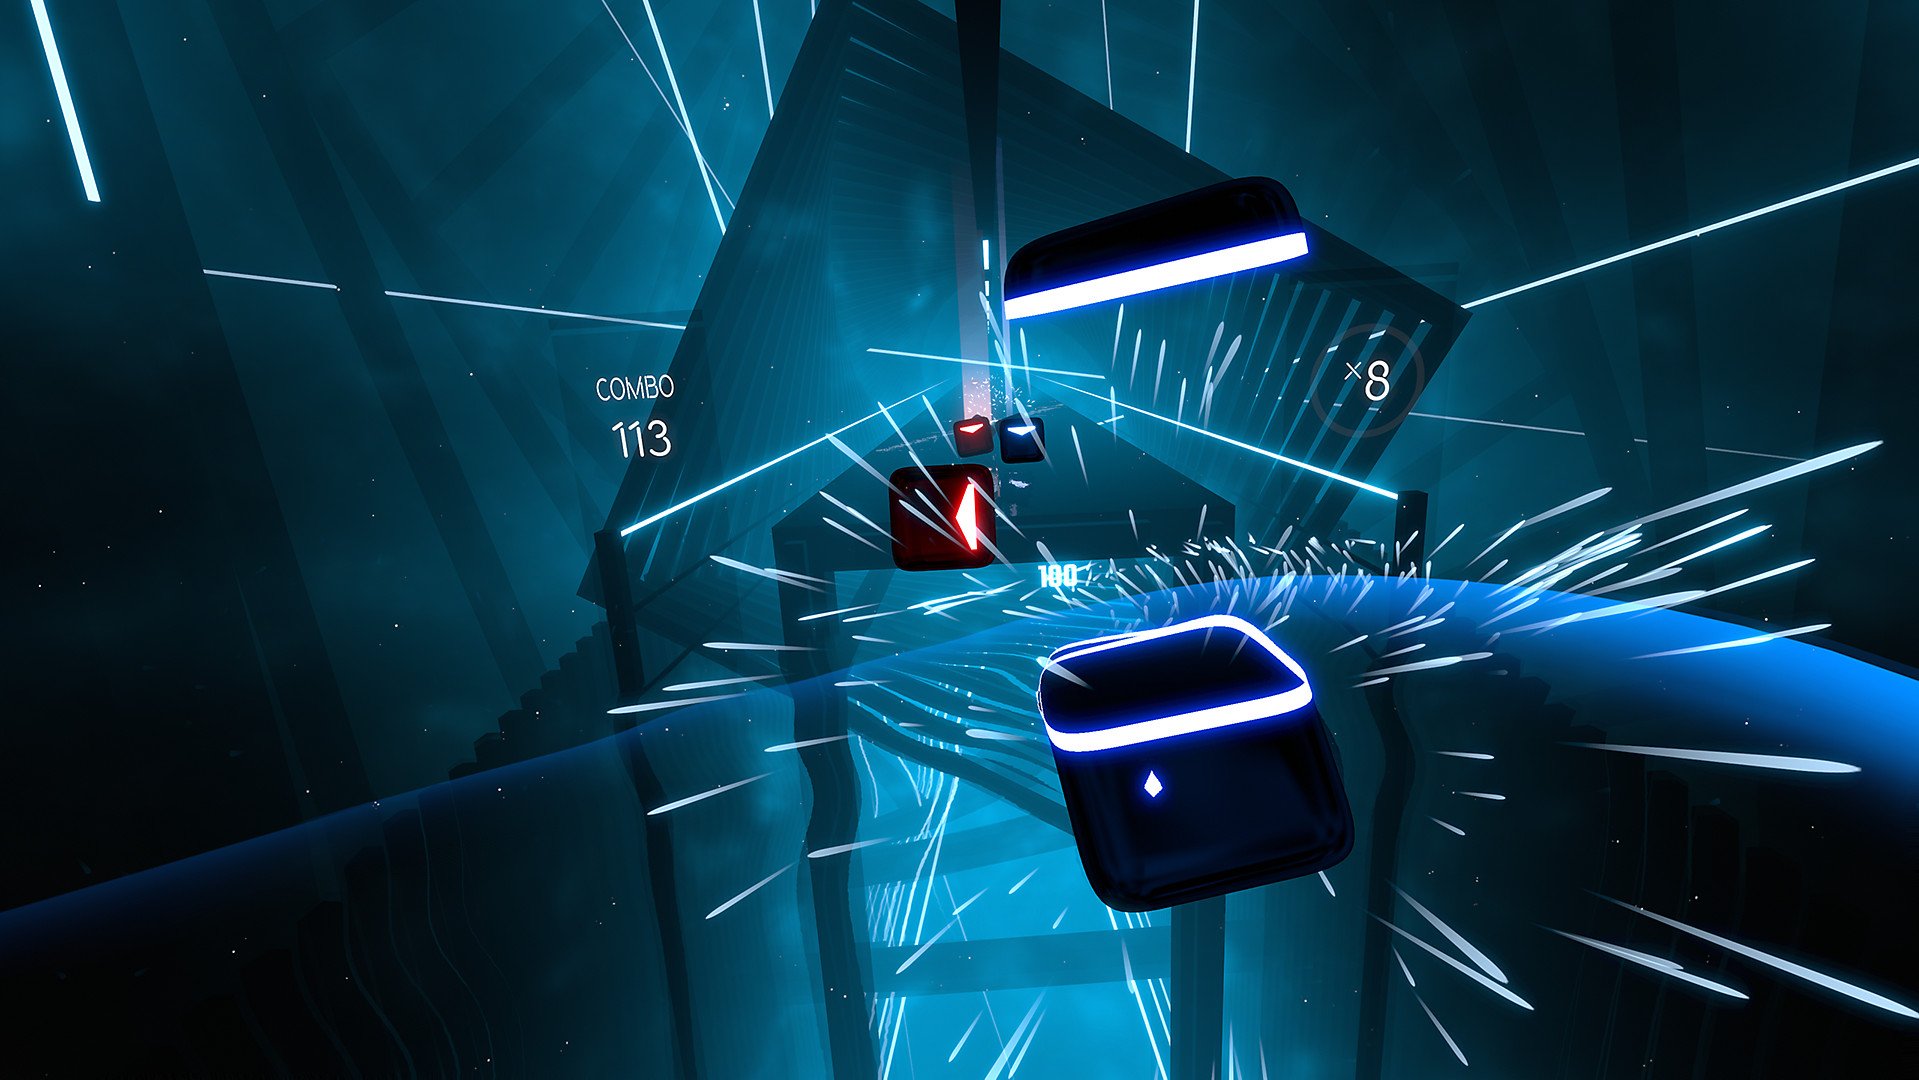 Beat Saber For Playstation Vr Review As Good As You Hoped Android Central